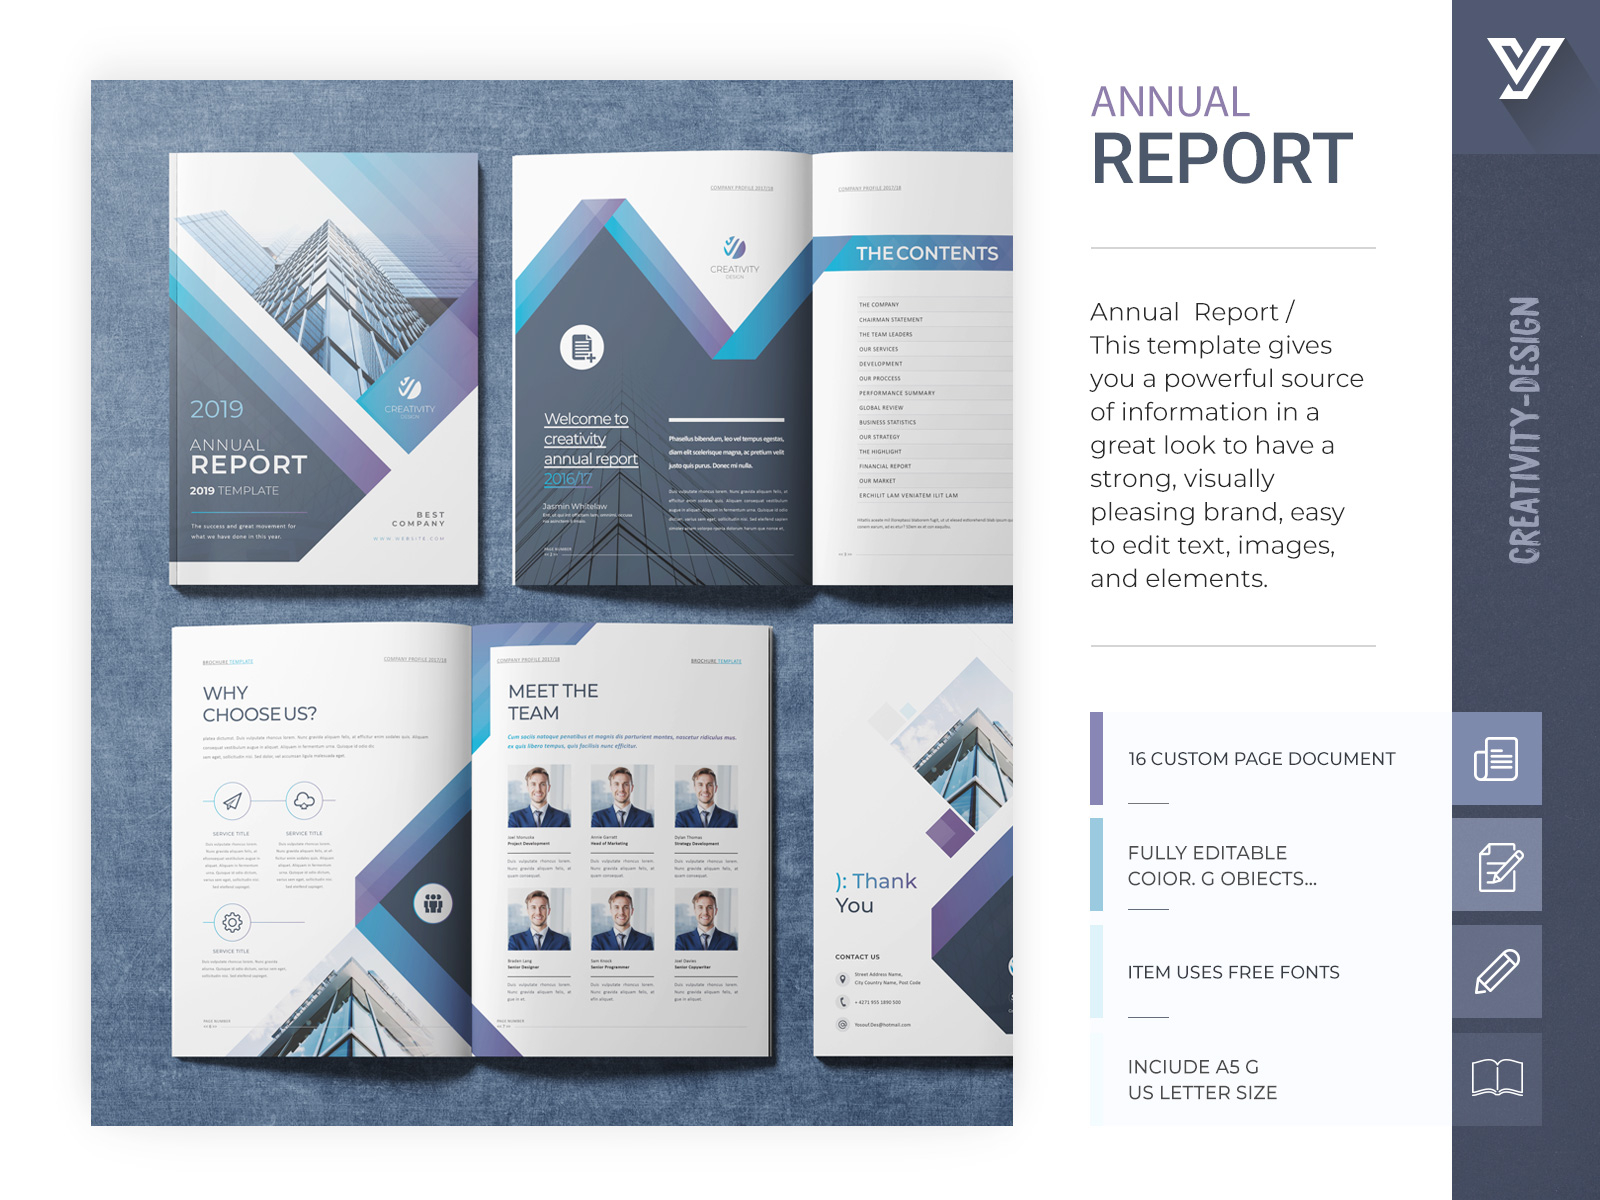 Annual Report Template by Creativity-Design on Dribbble Pertaining To Chairman